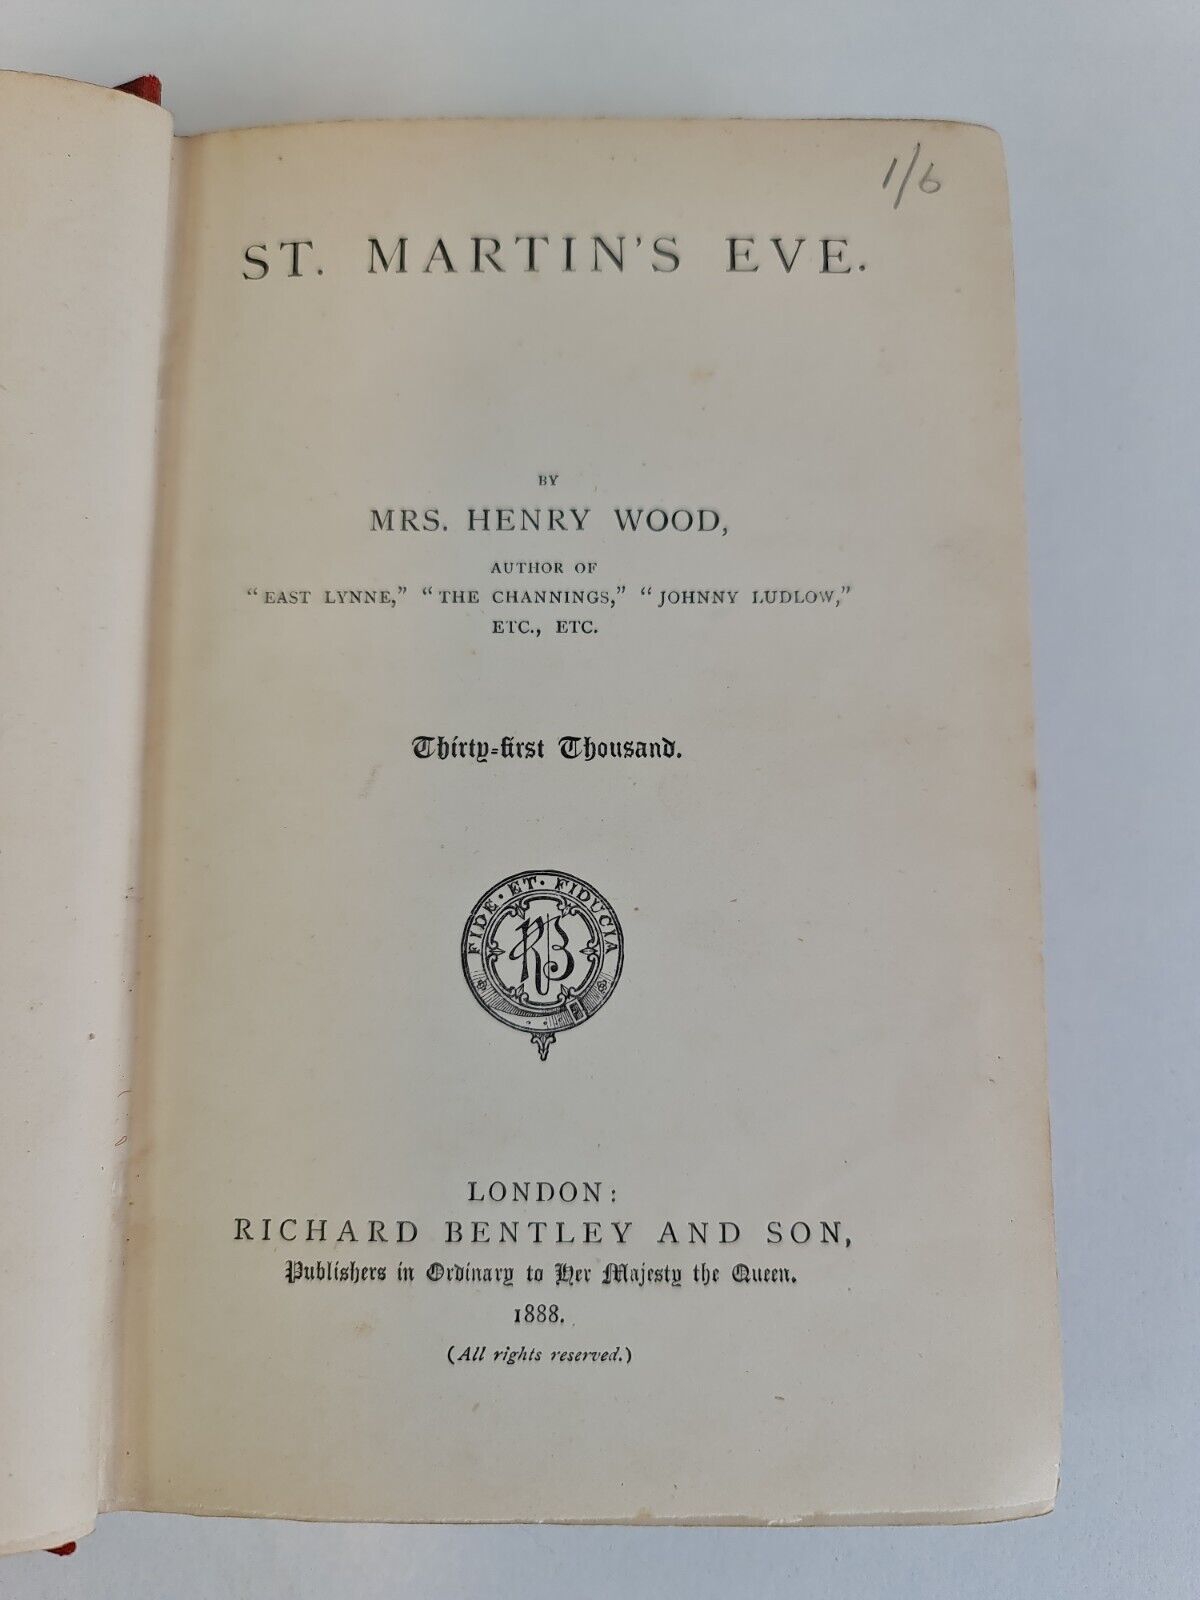 St. Martin's Eve by Mrs Henry Wood (1888)